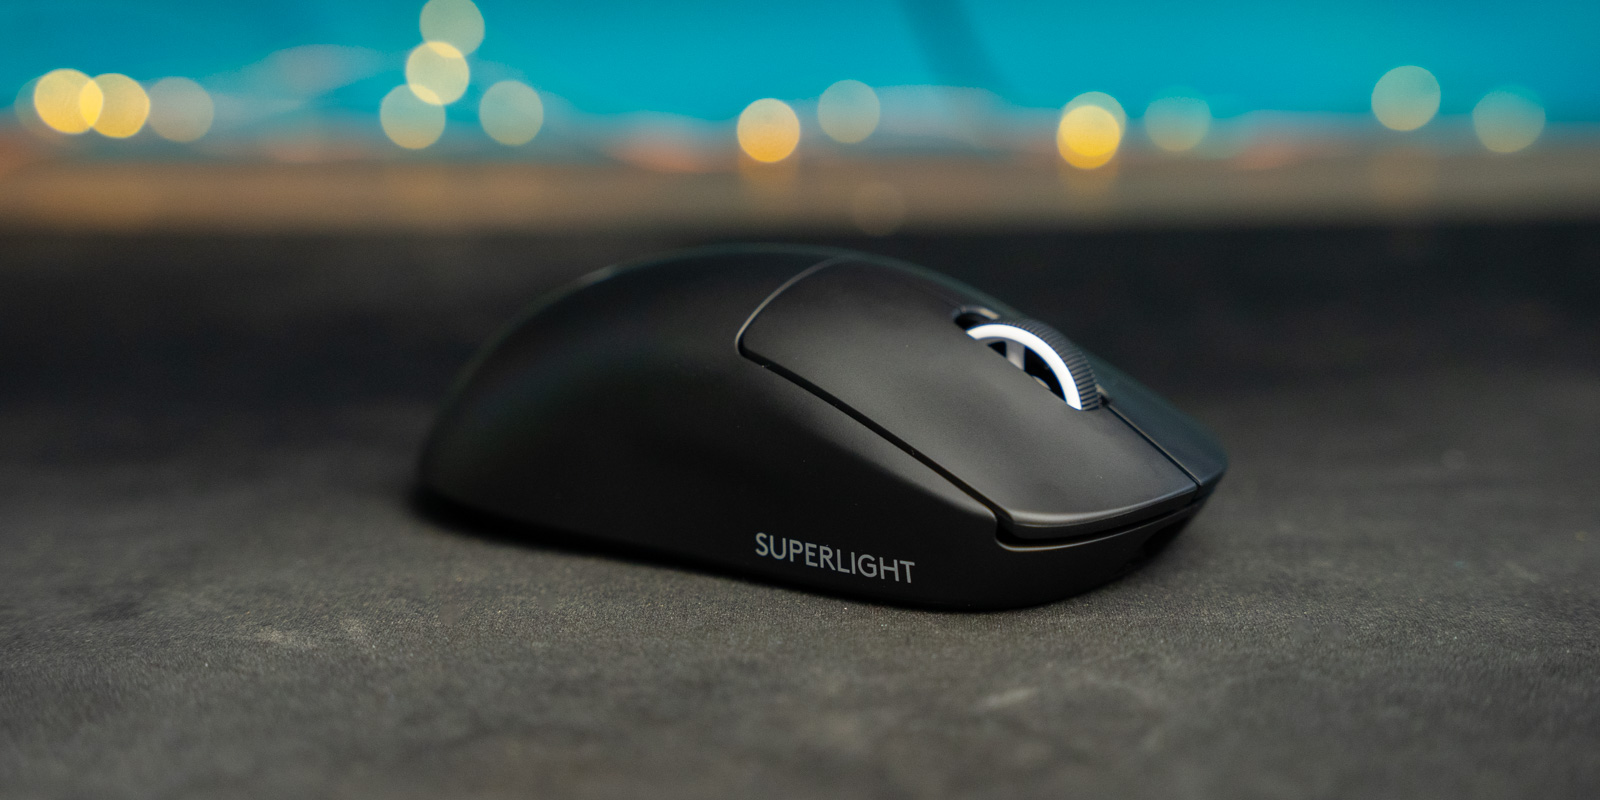 Superlight 2 review: You don't need it but you will still want it